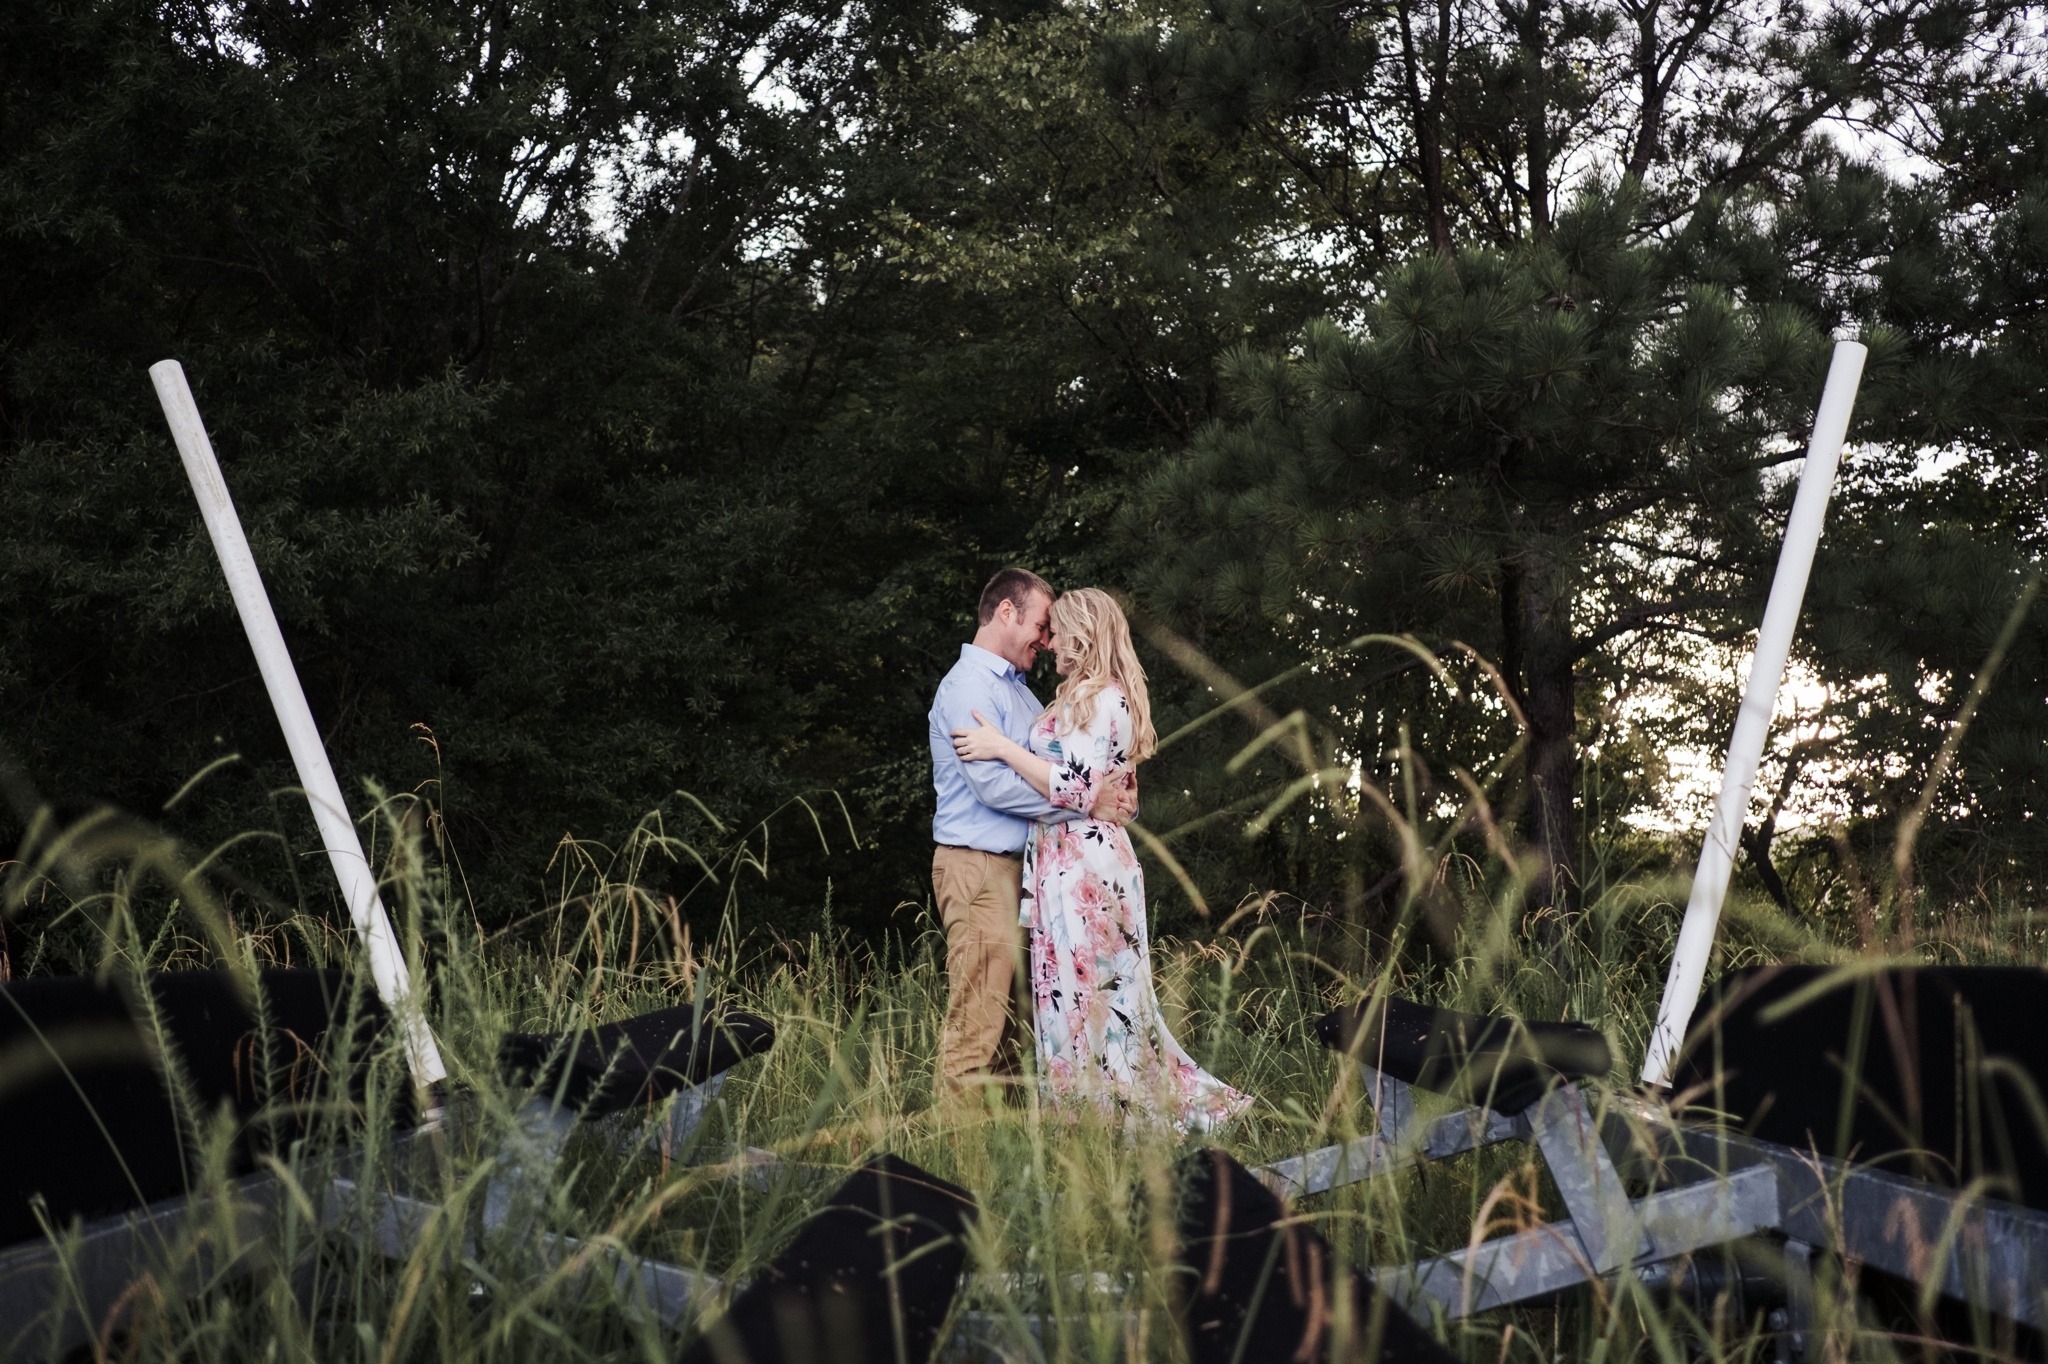 These love birds embrace all the while grass grows wild around them during their Downtown Apex Engagement Session